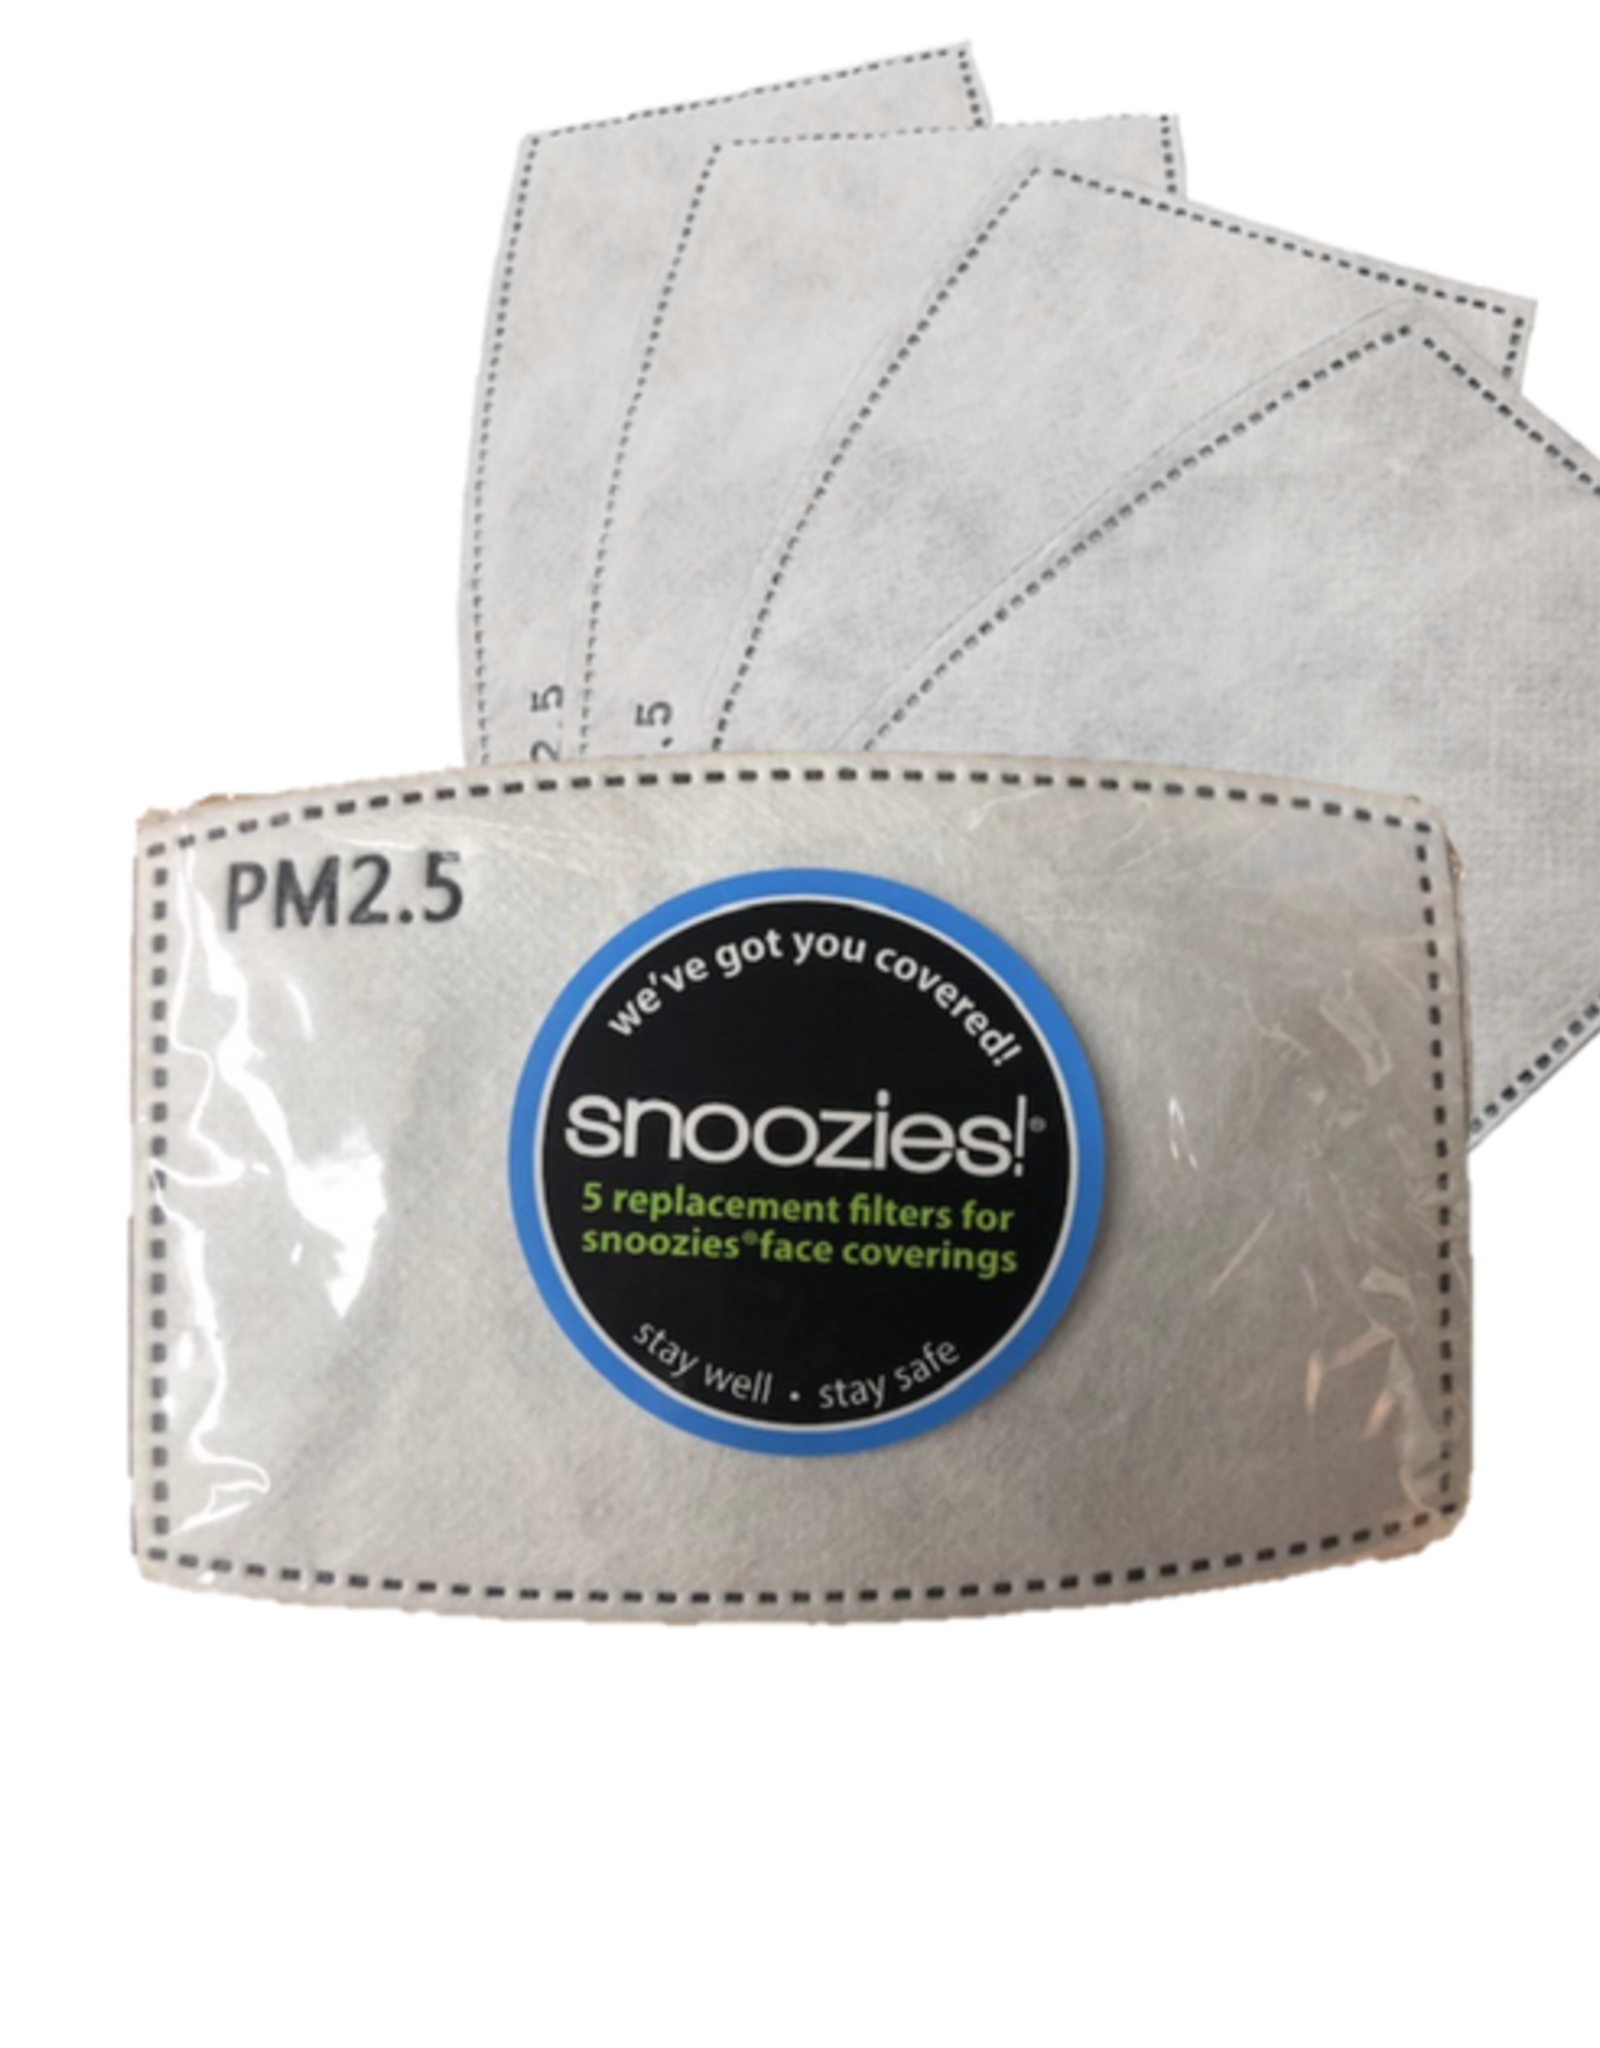 Snoozies SALE-Adult Replacement Filters for Snoozies Face Covering